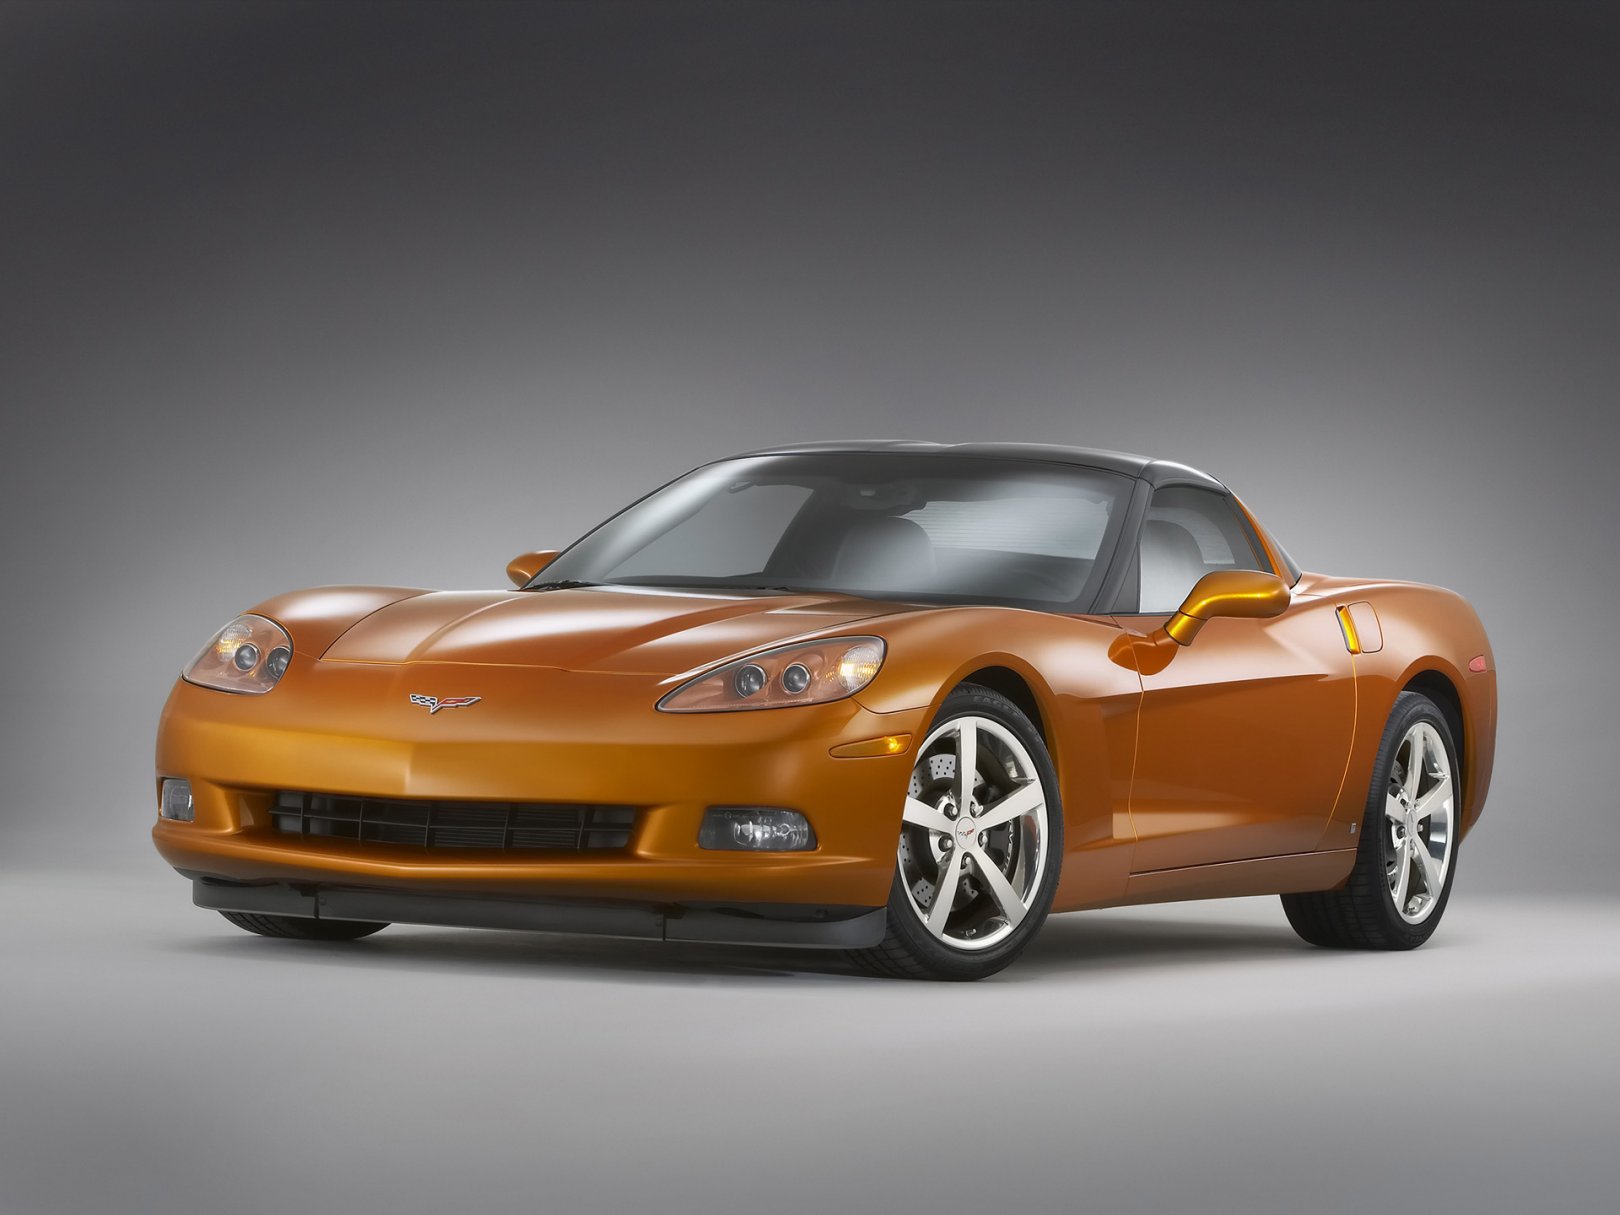 Foto: Chevrolet Corvette Front And Side Low View (2008)